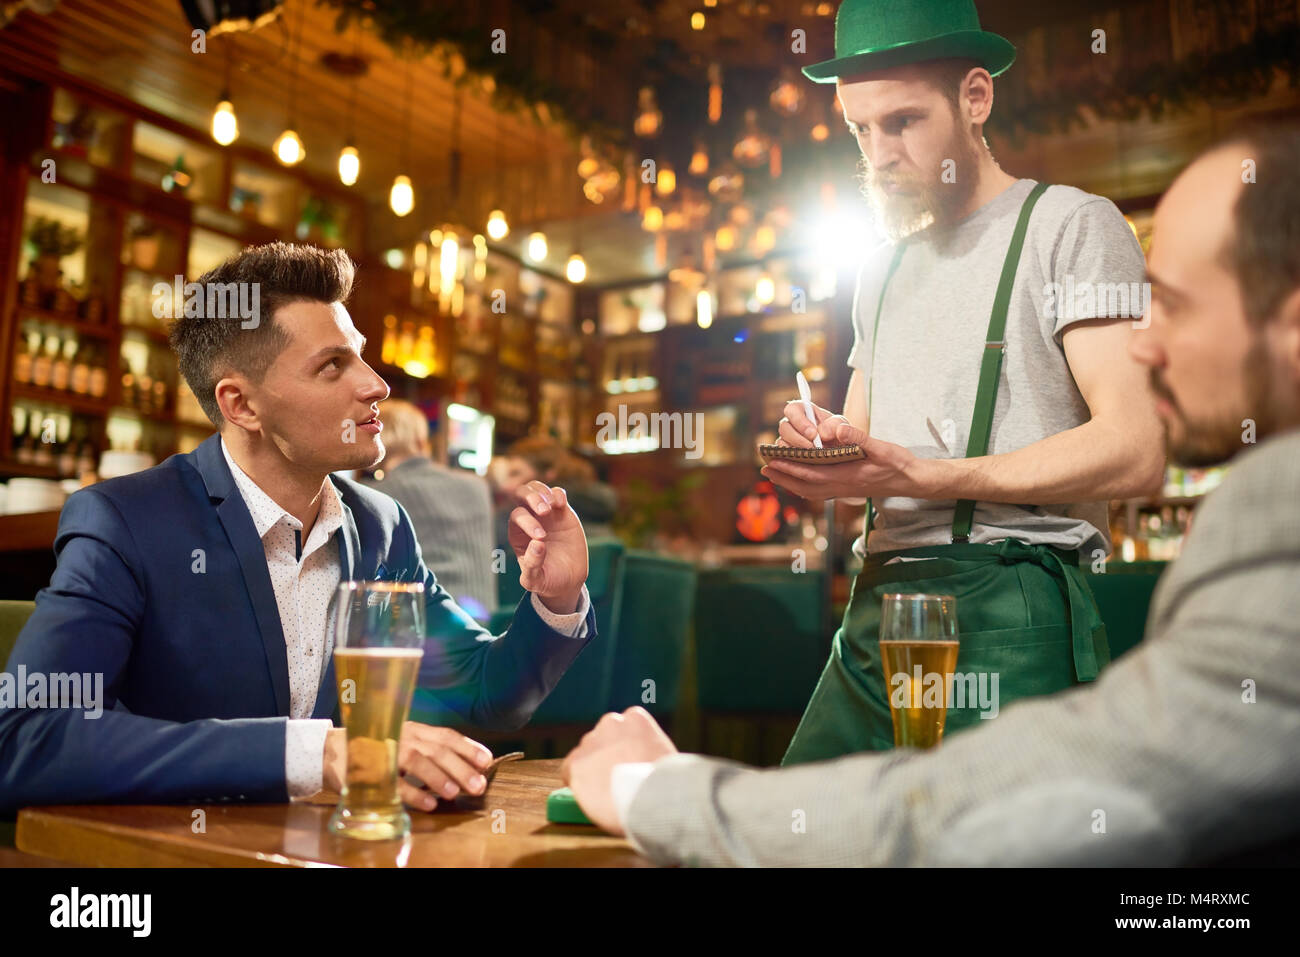 Celebrating St. Patricks Day in cafe: two friends wearing suits sitting at table and making order while bearded waiter in leprechaun costume standing  Stock Photo